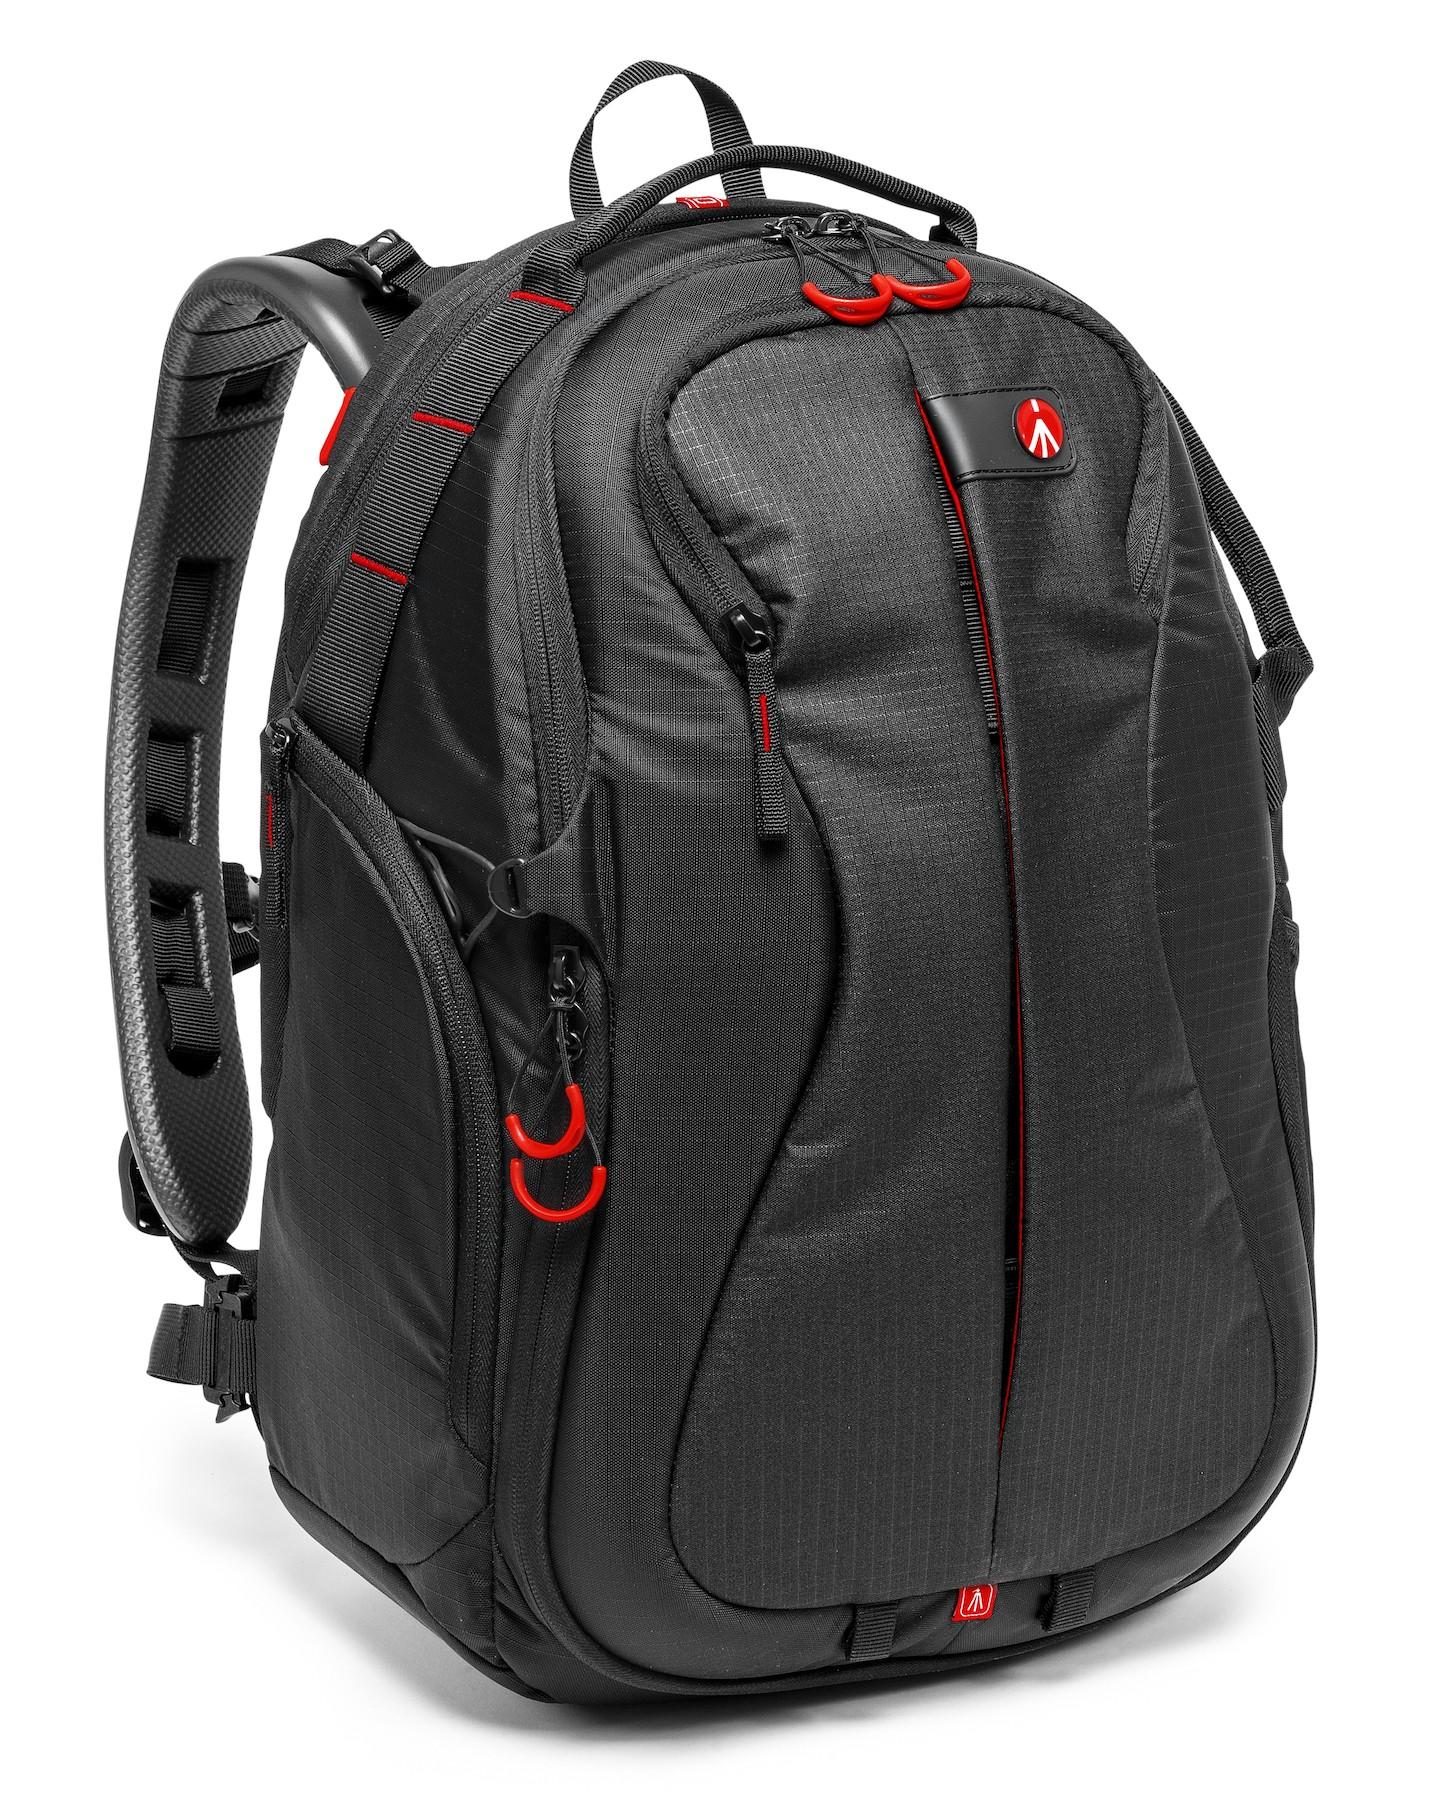 Manfrotto Pro Light camera backpack Minibee-120 for DSLR/CSC (MB PL-MB-120)